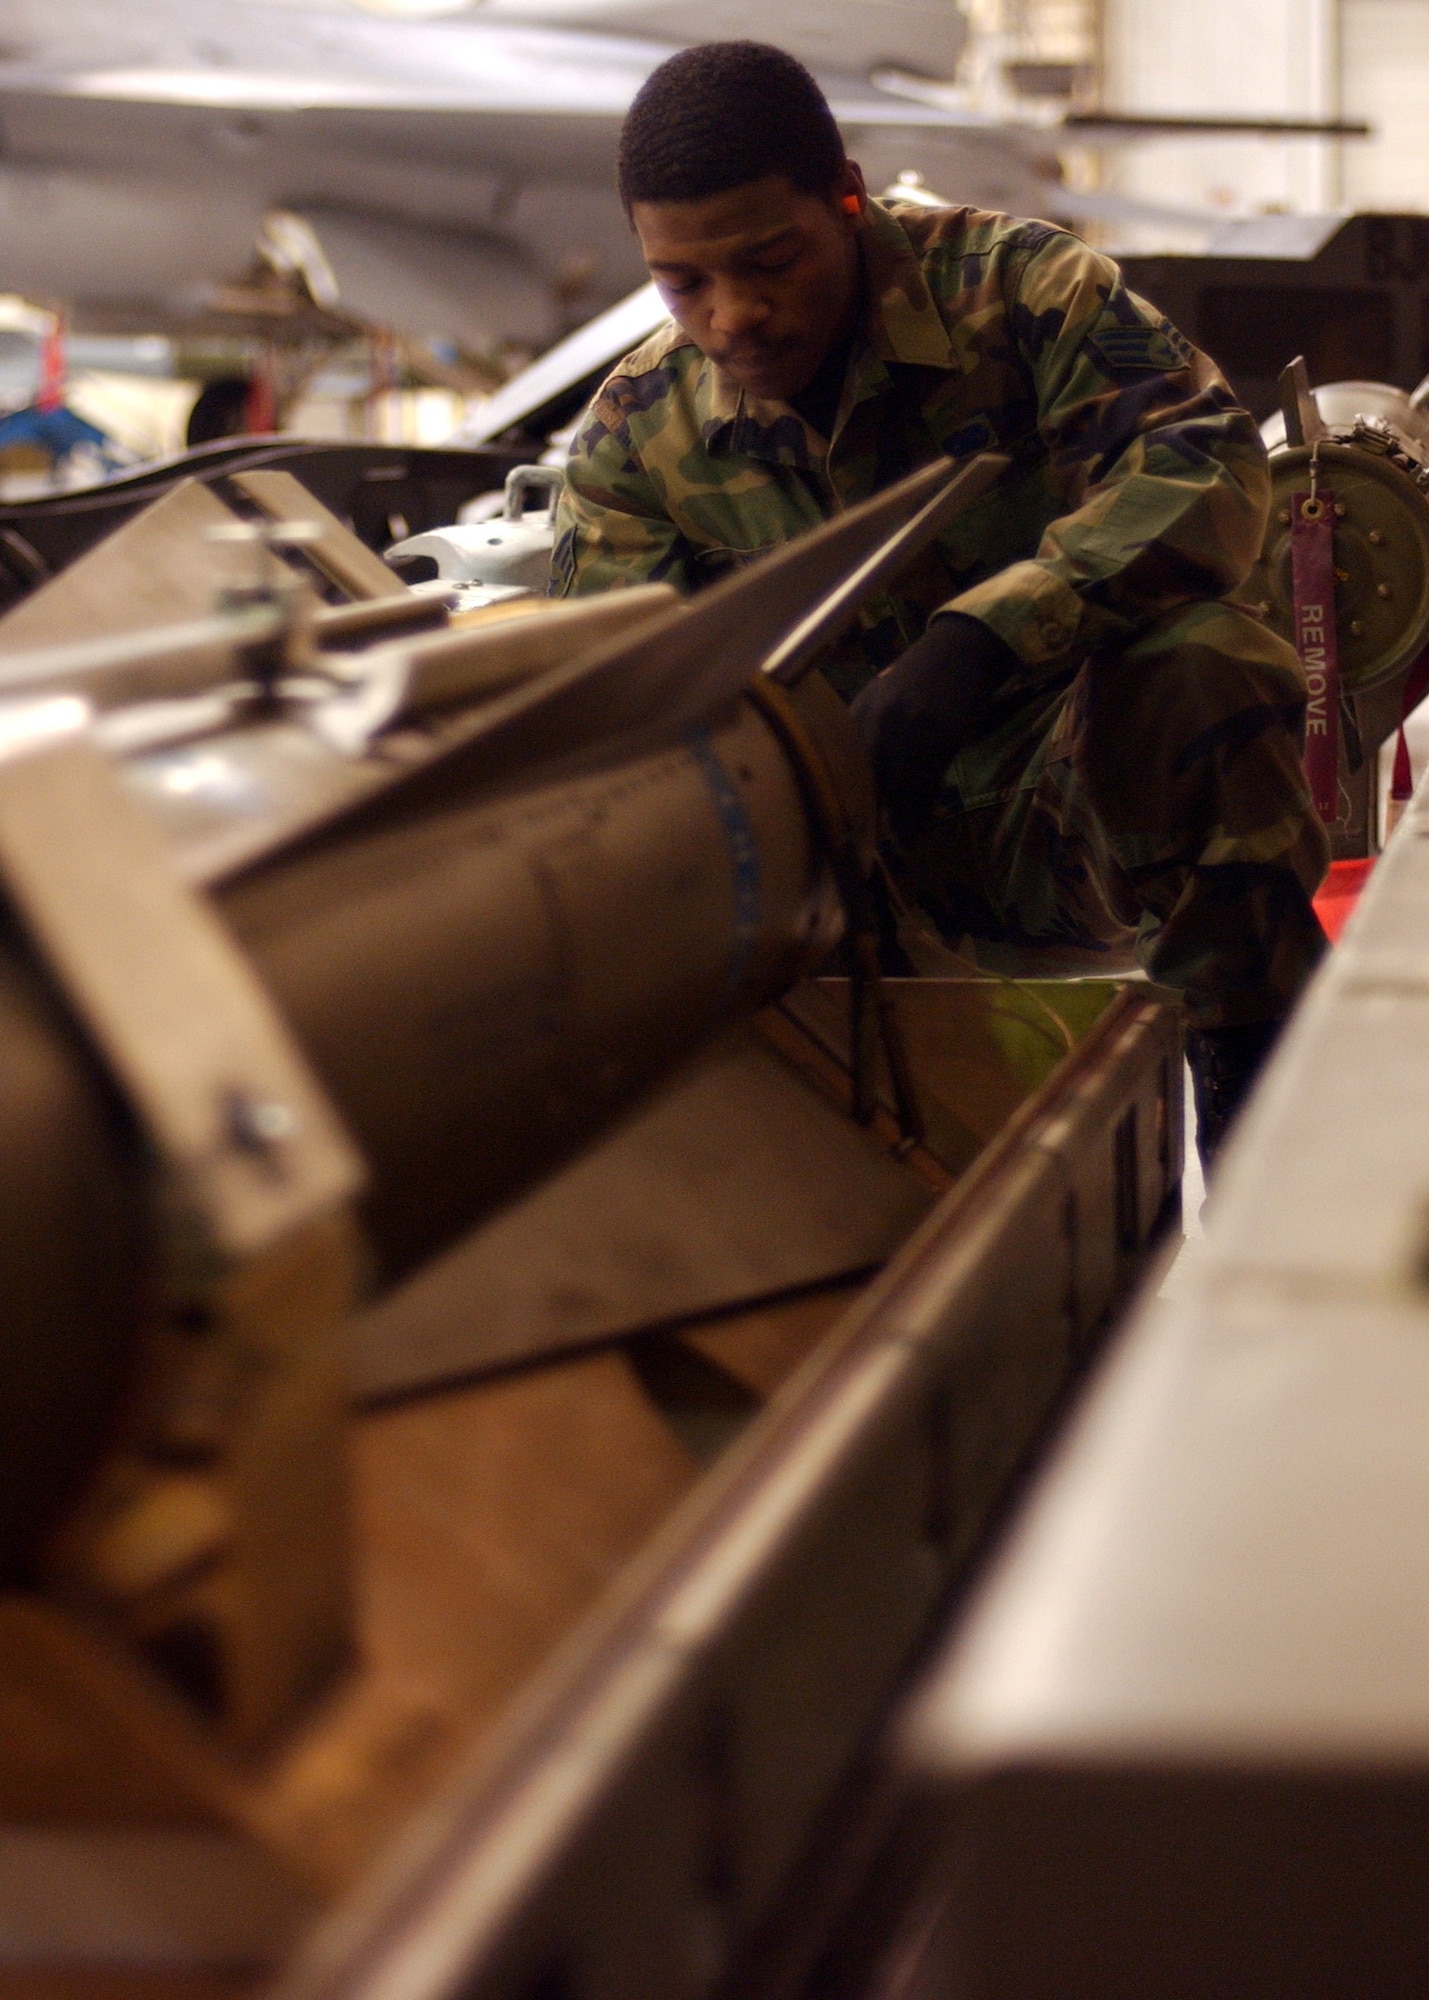 EIELSON AIR FORCE BASE, Alaska -- Senior Airman Keitric King, 355th Aircraft Maintenance Unit, 354th Aircraft Maintenance Squadron prepares the Air to Ground Missile 65 D Bomb to be loaded onto an A-10 thunderbolt II for the Weapons Standardization Load Crew of the Year Competition here on Jan. 11. The Competition evaluates technical proficiency, safety procedures and overall time. The 355th AMU's overall time was 50 minutes and 17 seconds. 
(US Air Force Photo by Airman Jonathan Snyder)